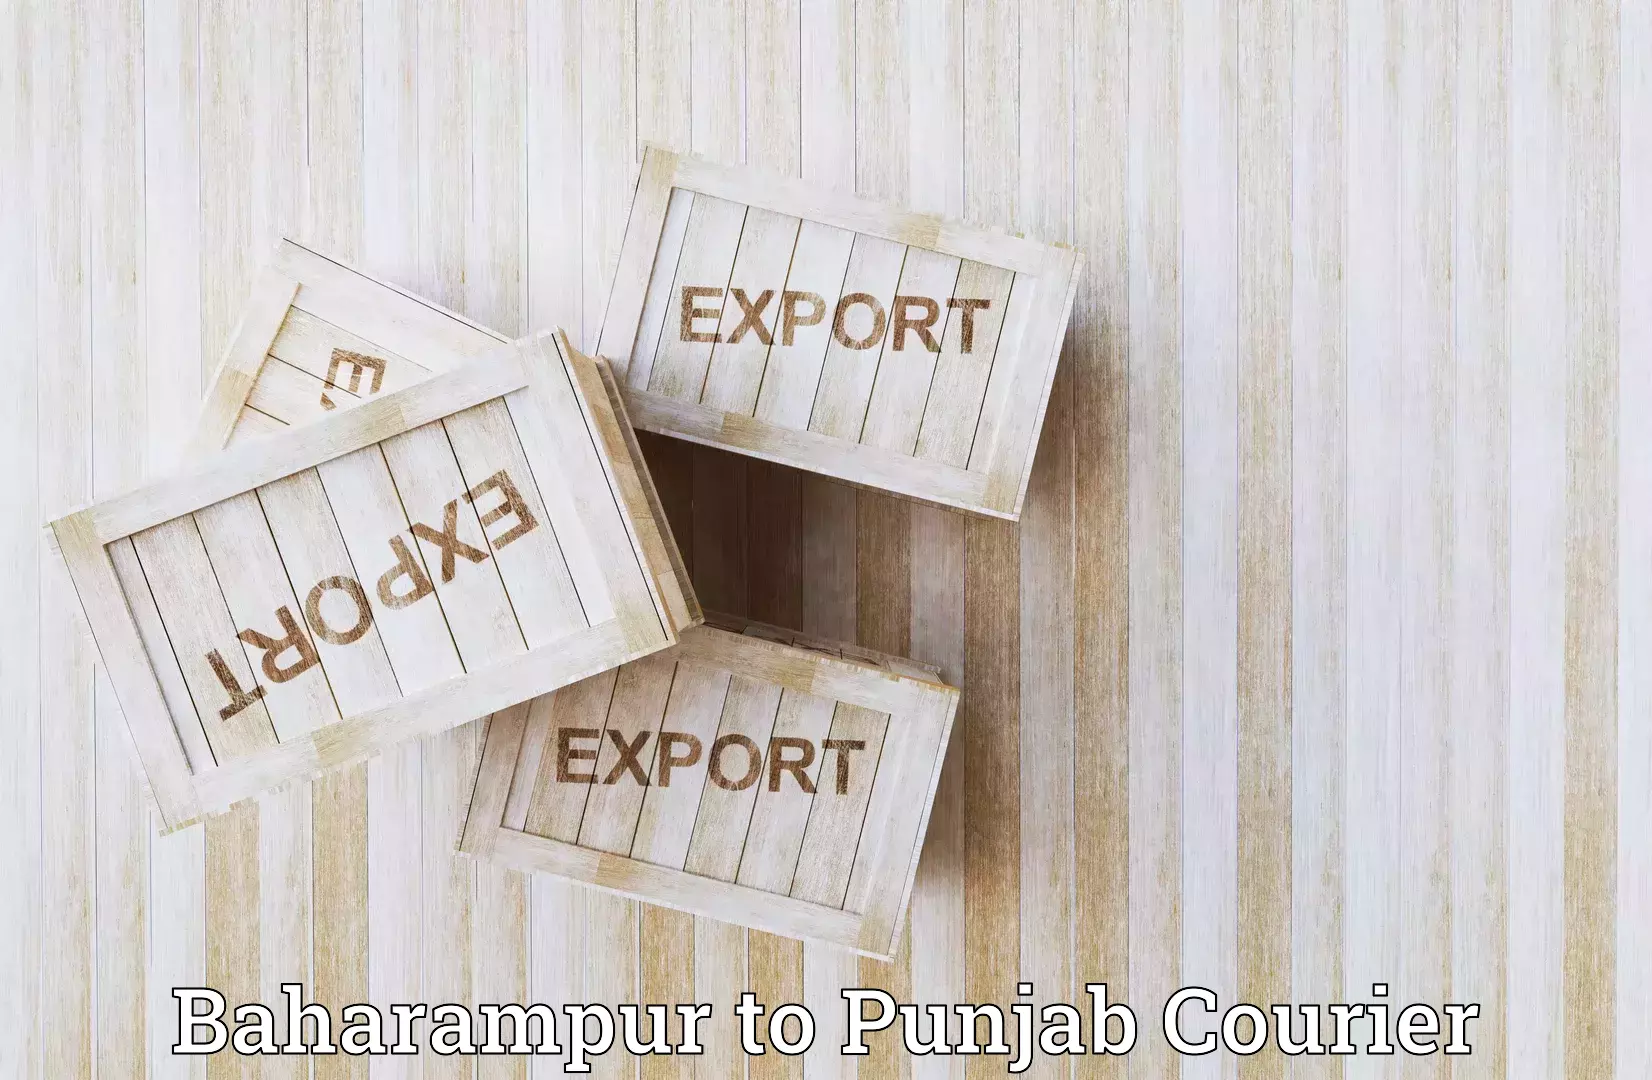 Streamlined shipping process Baharampur to Mohali